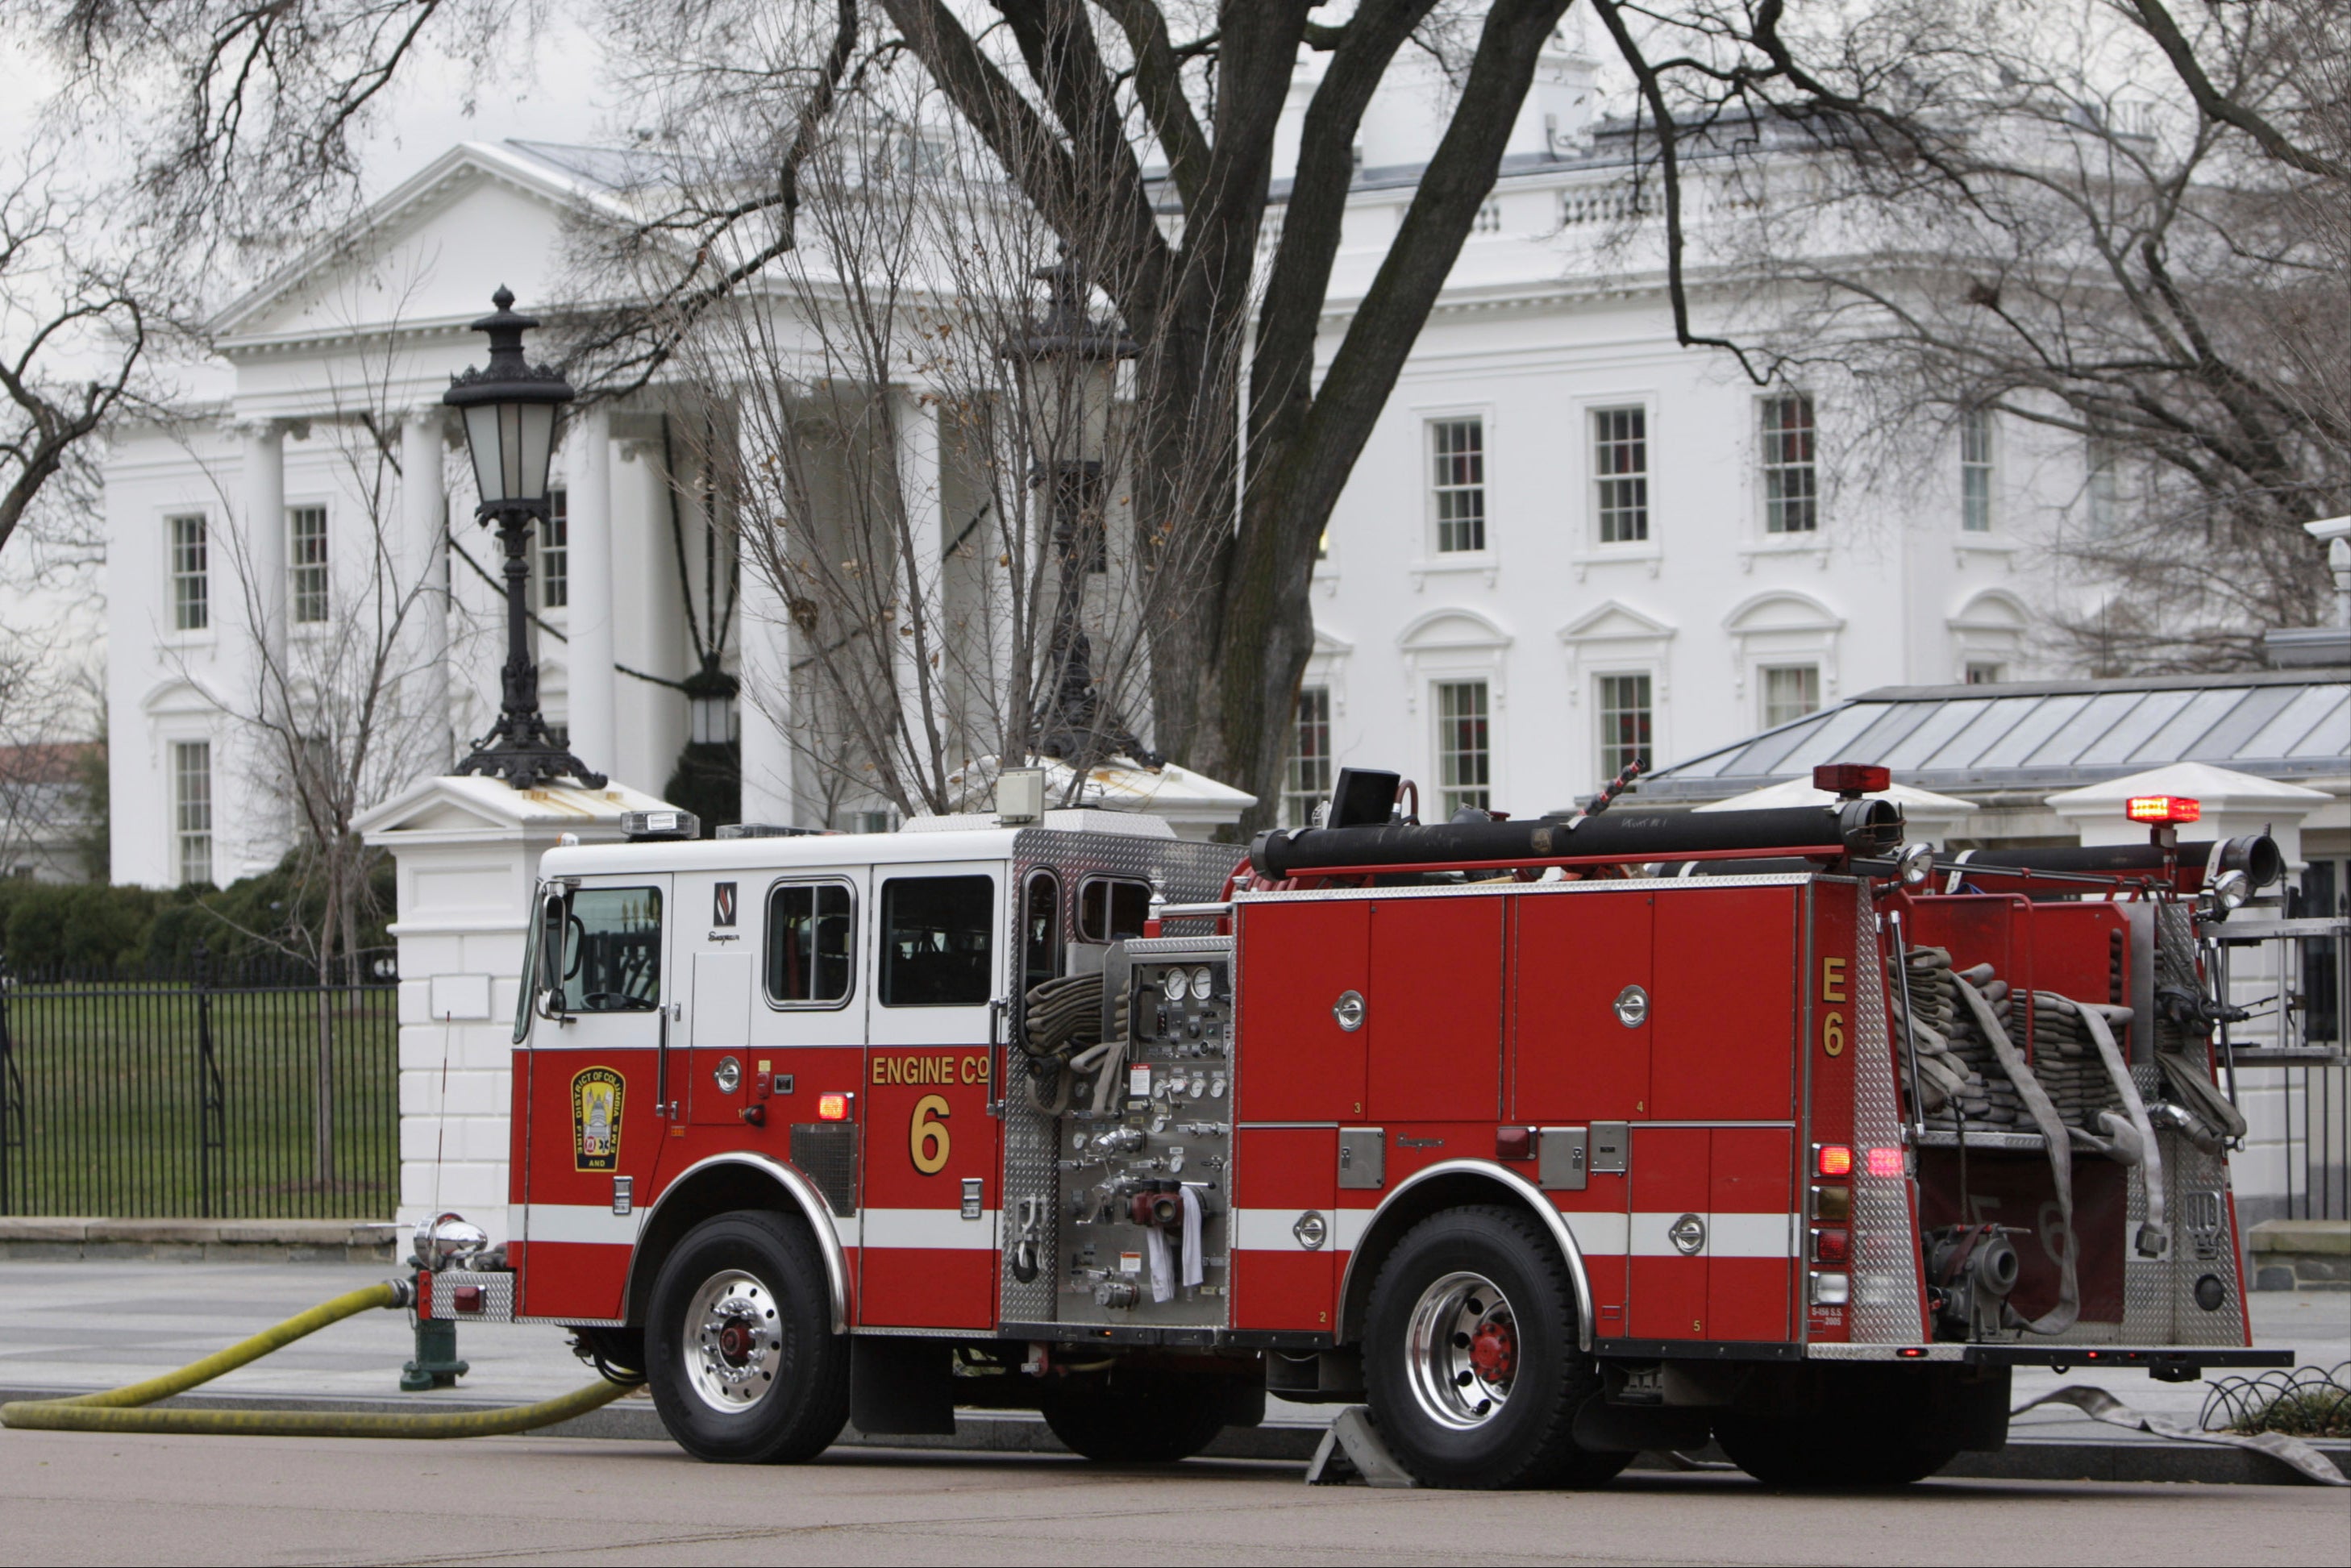 A fire truck outside the White House following a reported ‘swatting' incident on 15 January